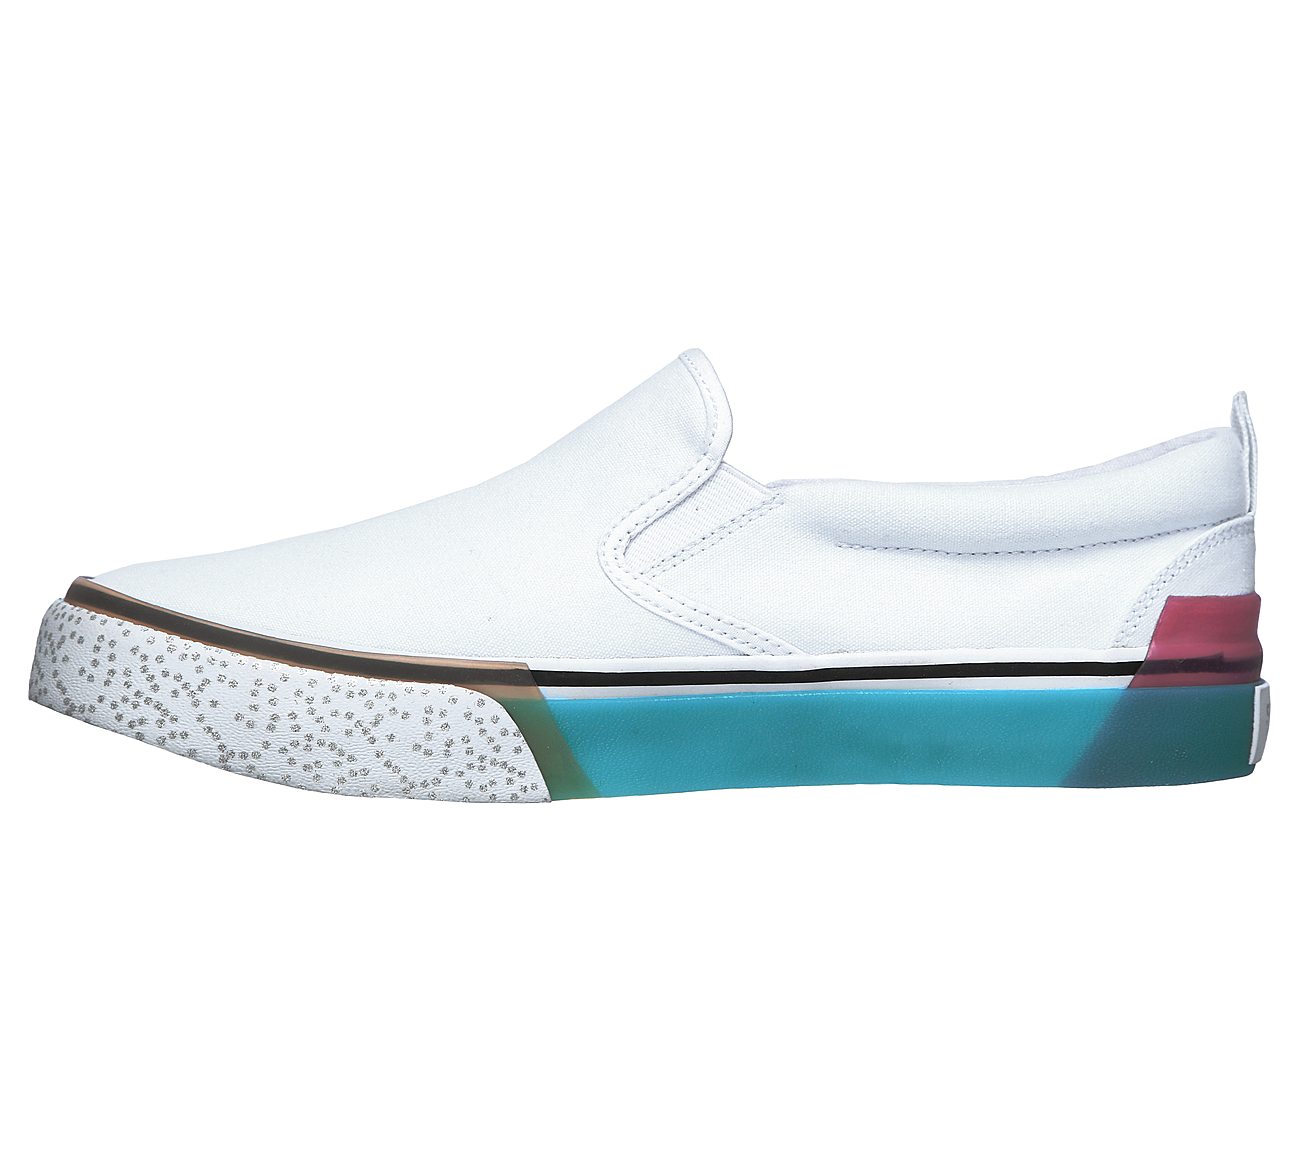 SPARKED - COOL AS ICE, WWWHITE Footwear Left View